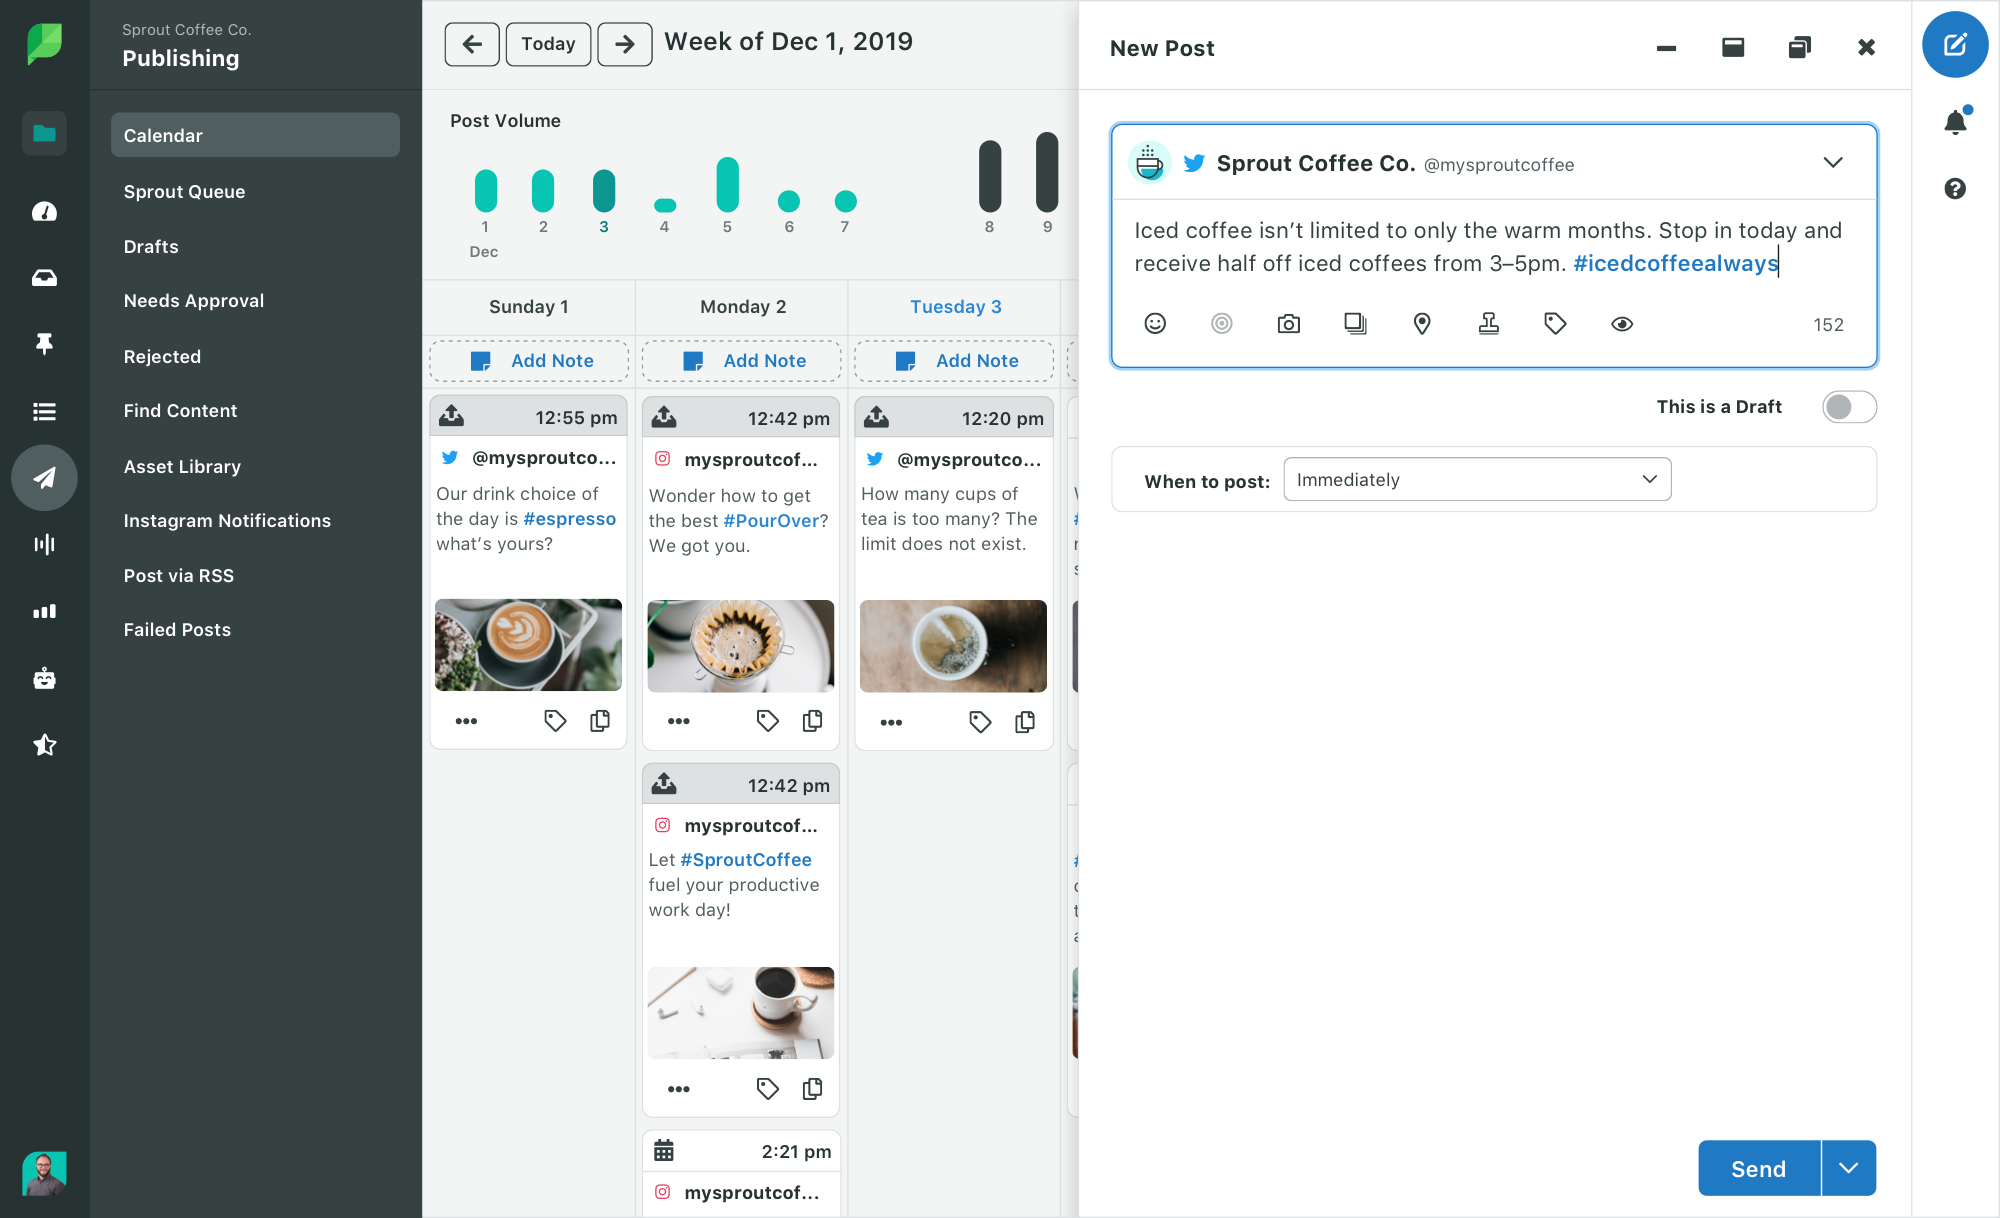 Screenshot of Sprout Social dashboard and how you can compose a new post or Tweet.